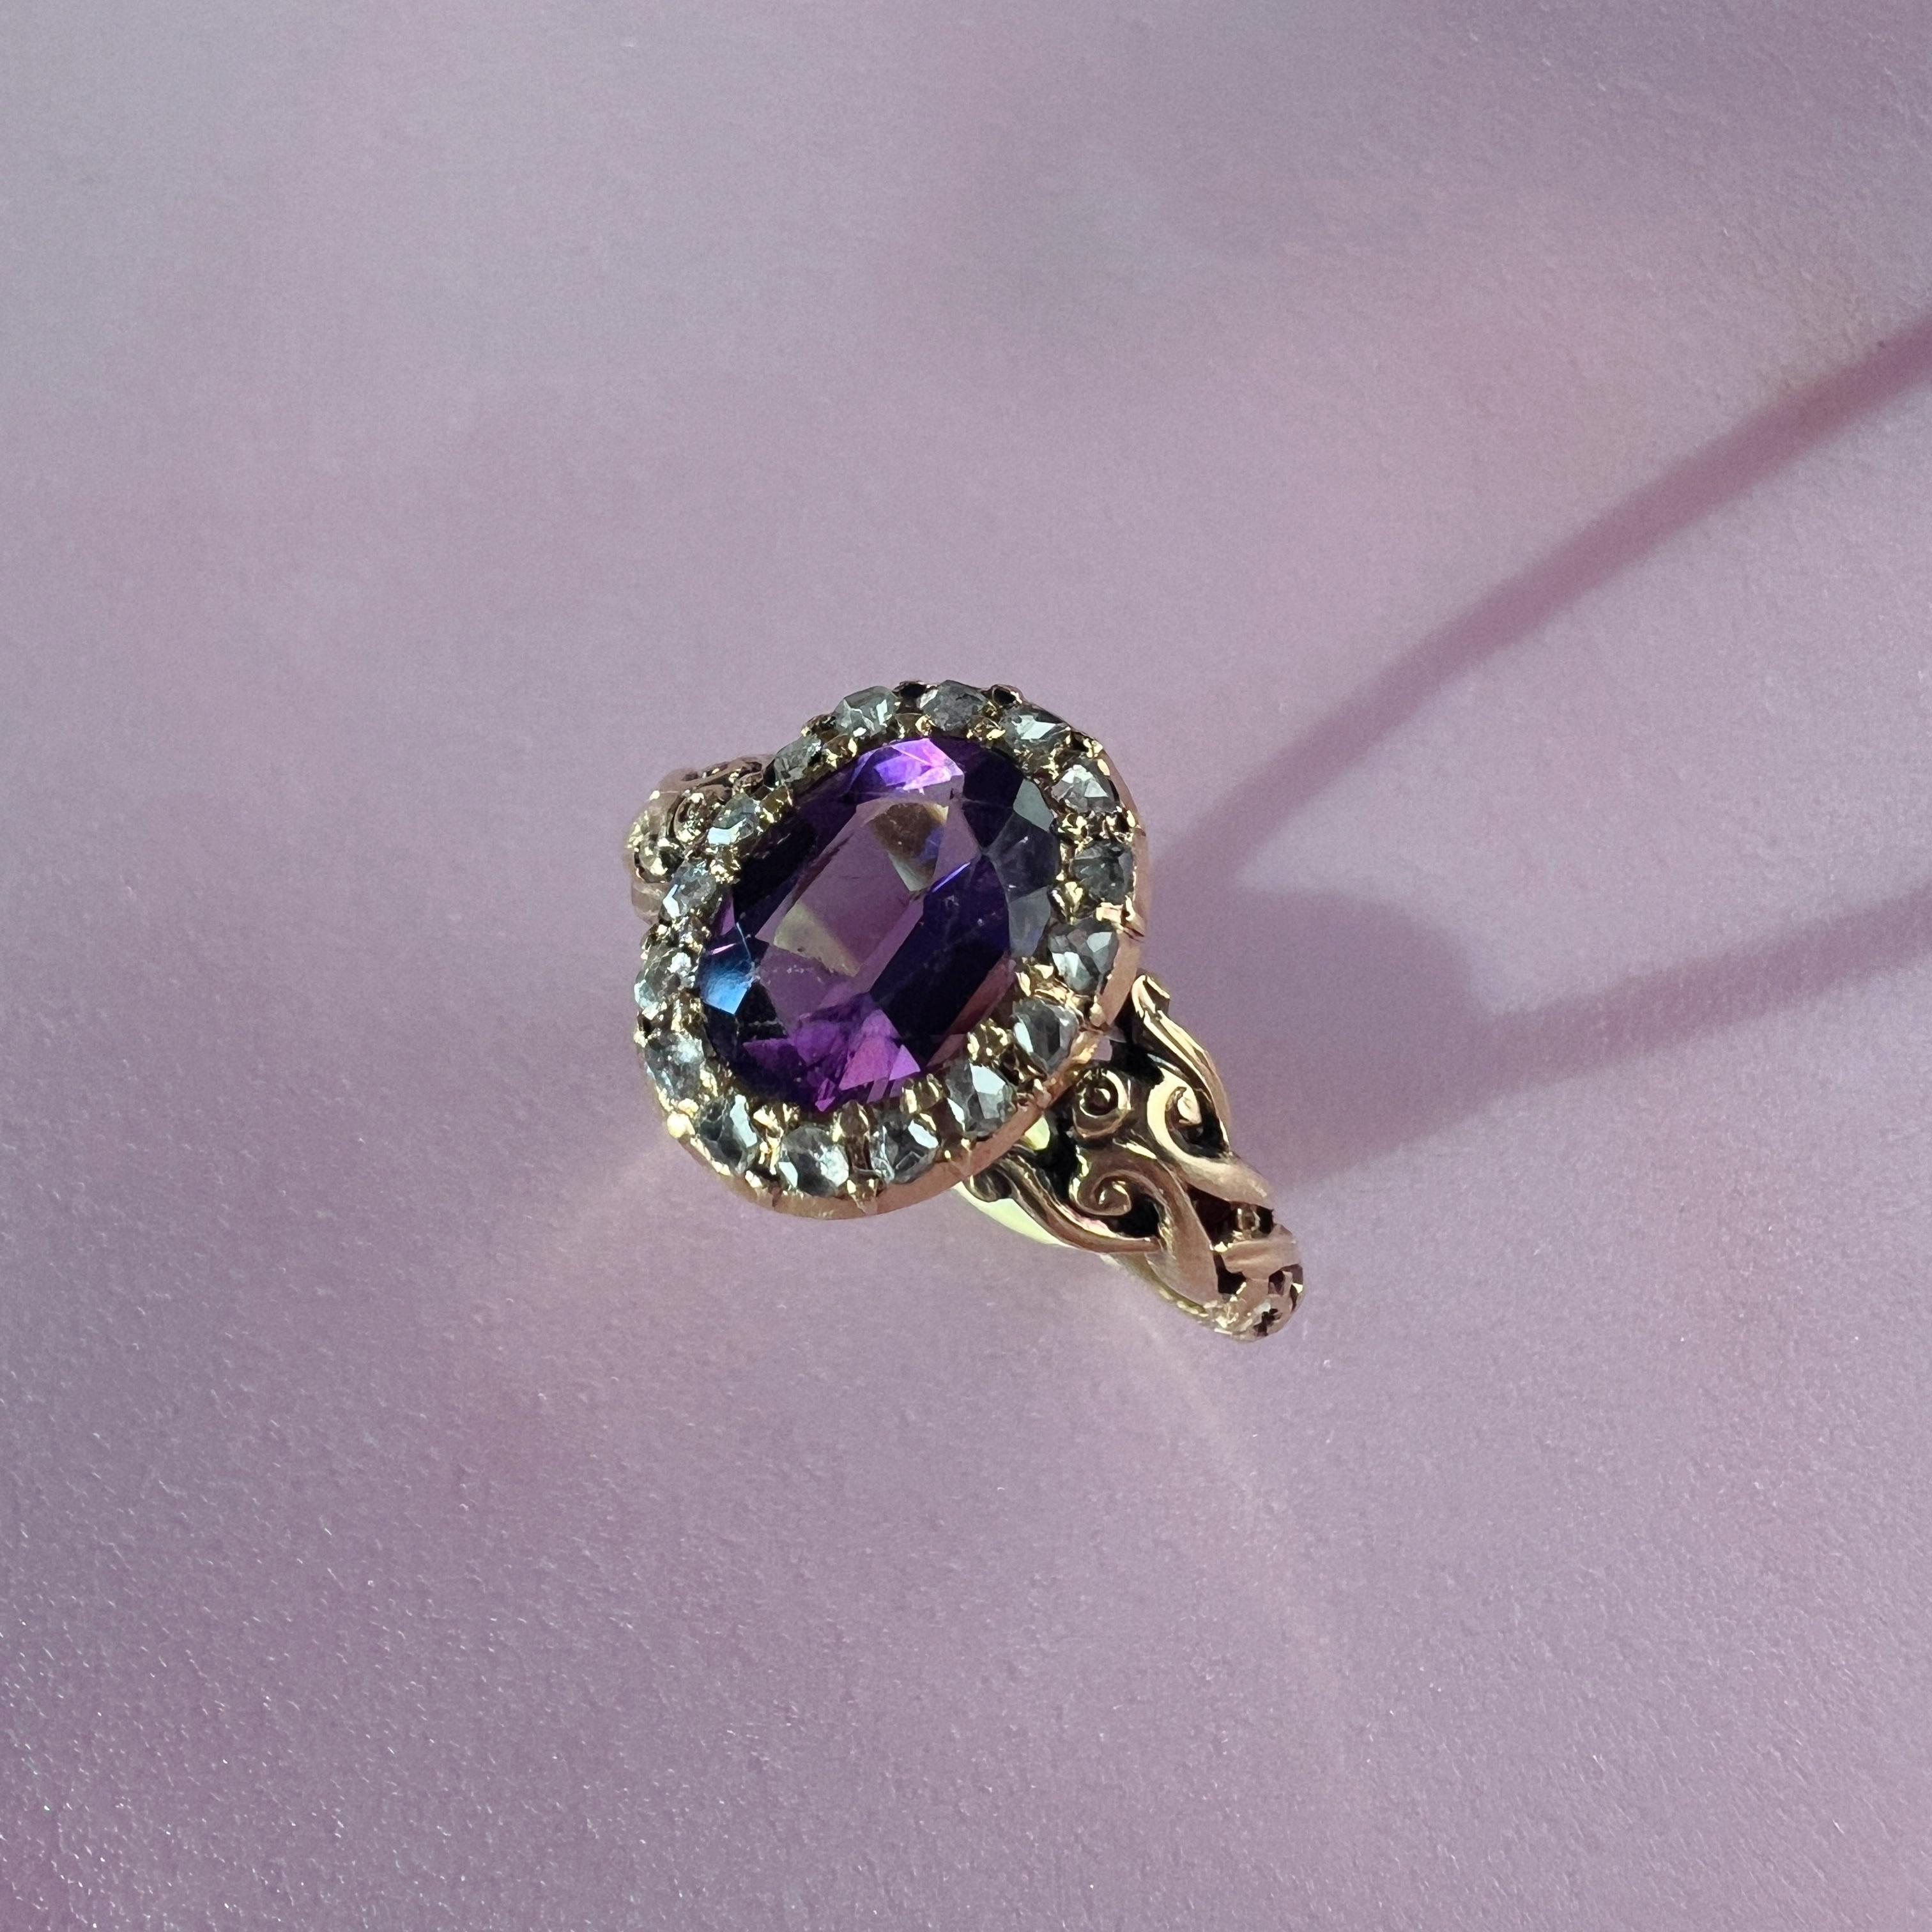 For sale a beautiful 18K gold amethyst diamond ring from the Victorian era.

The center of this ring is an oval-shaped amethyst, with a well saturated purple color that radiates with vibrant violet hues. It has an estimated weight of approximately